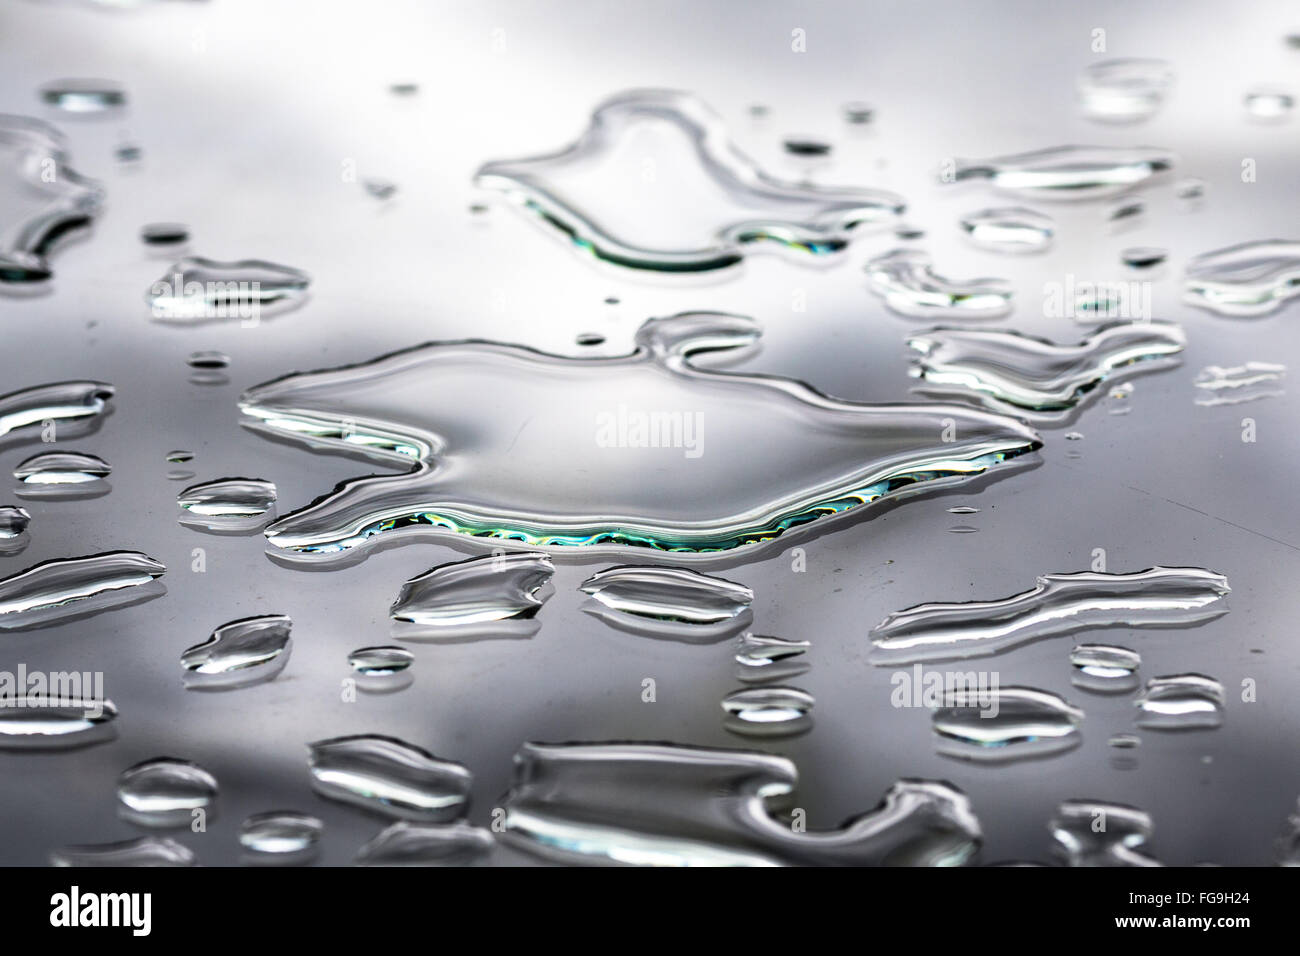 Close-Up Of Spilled Water On Glass Table Stock Photo - Alamy